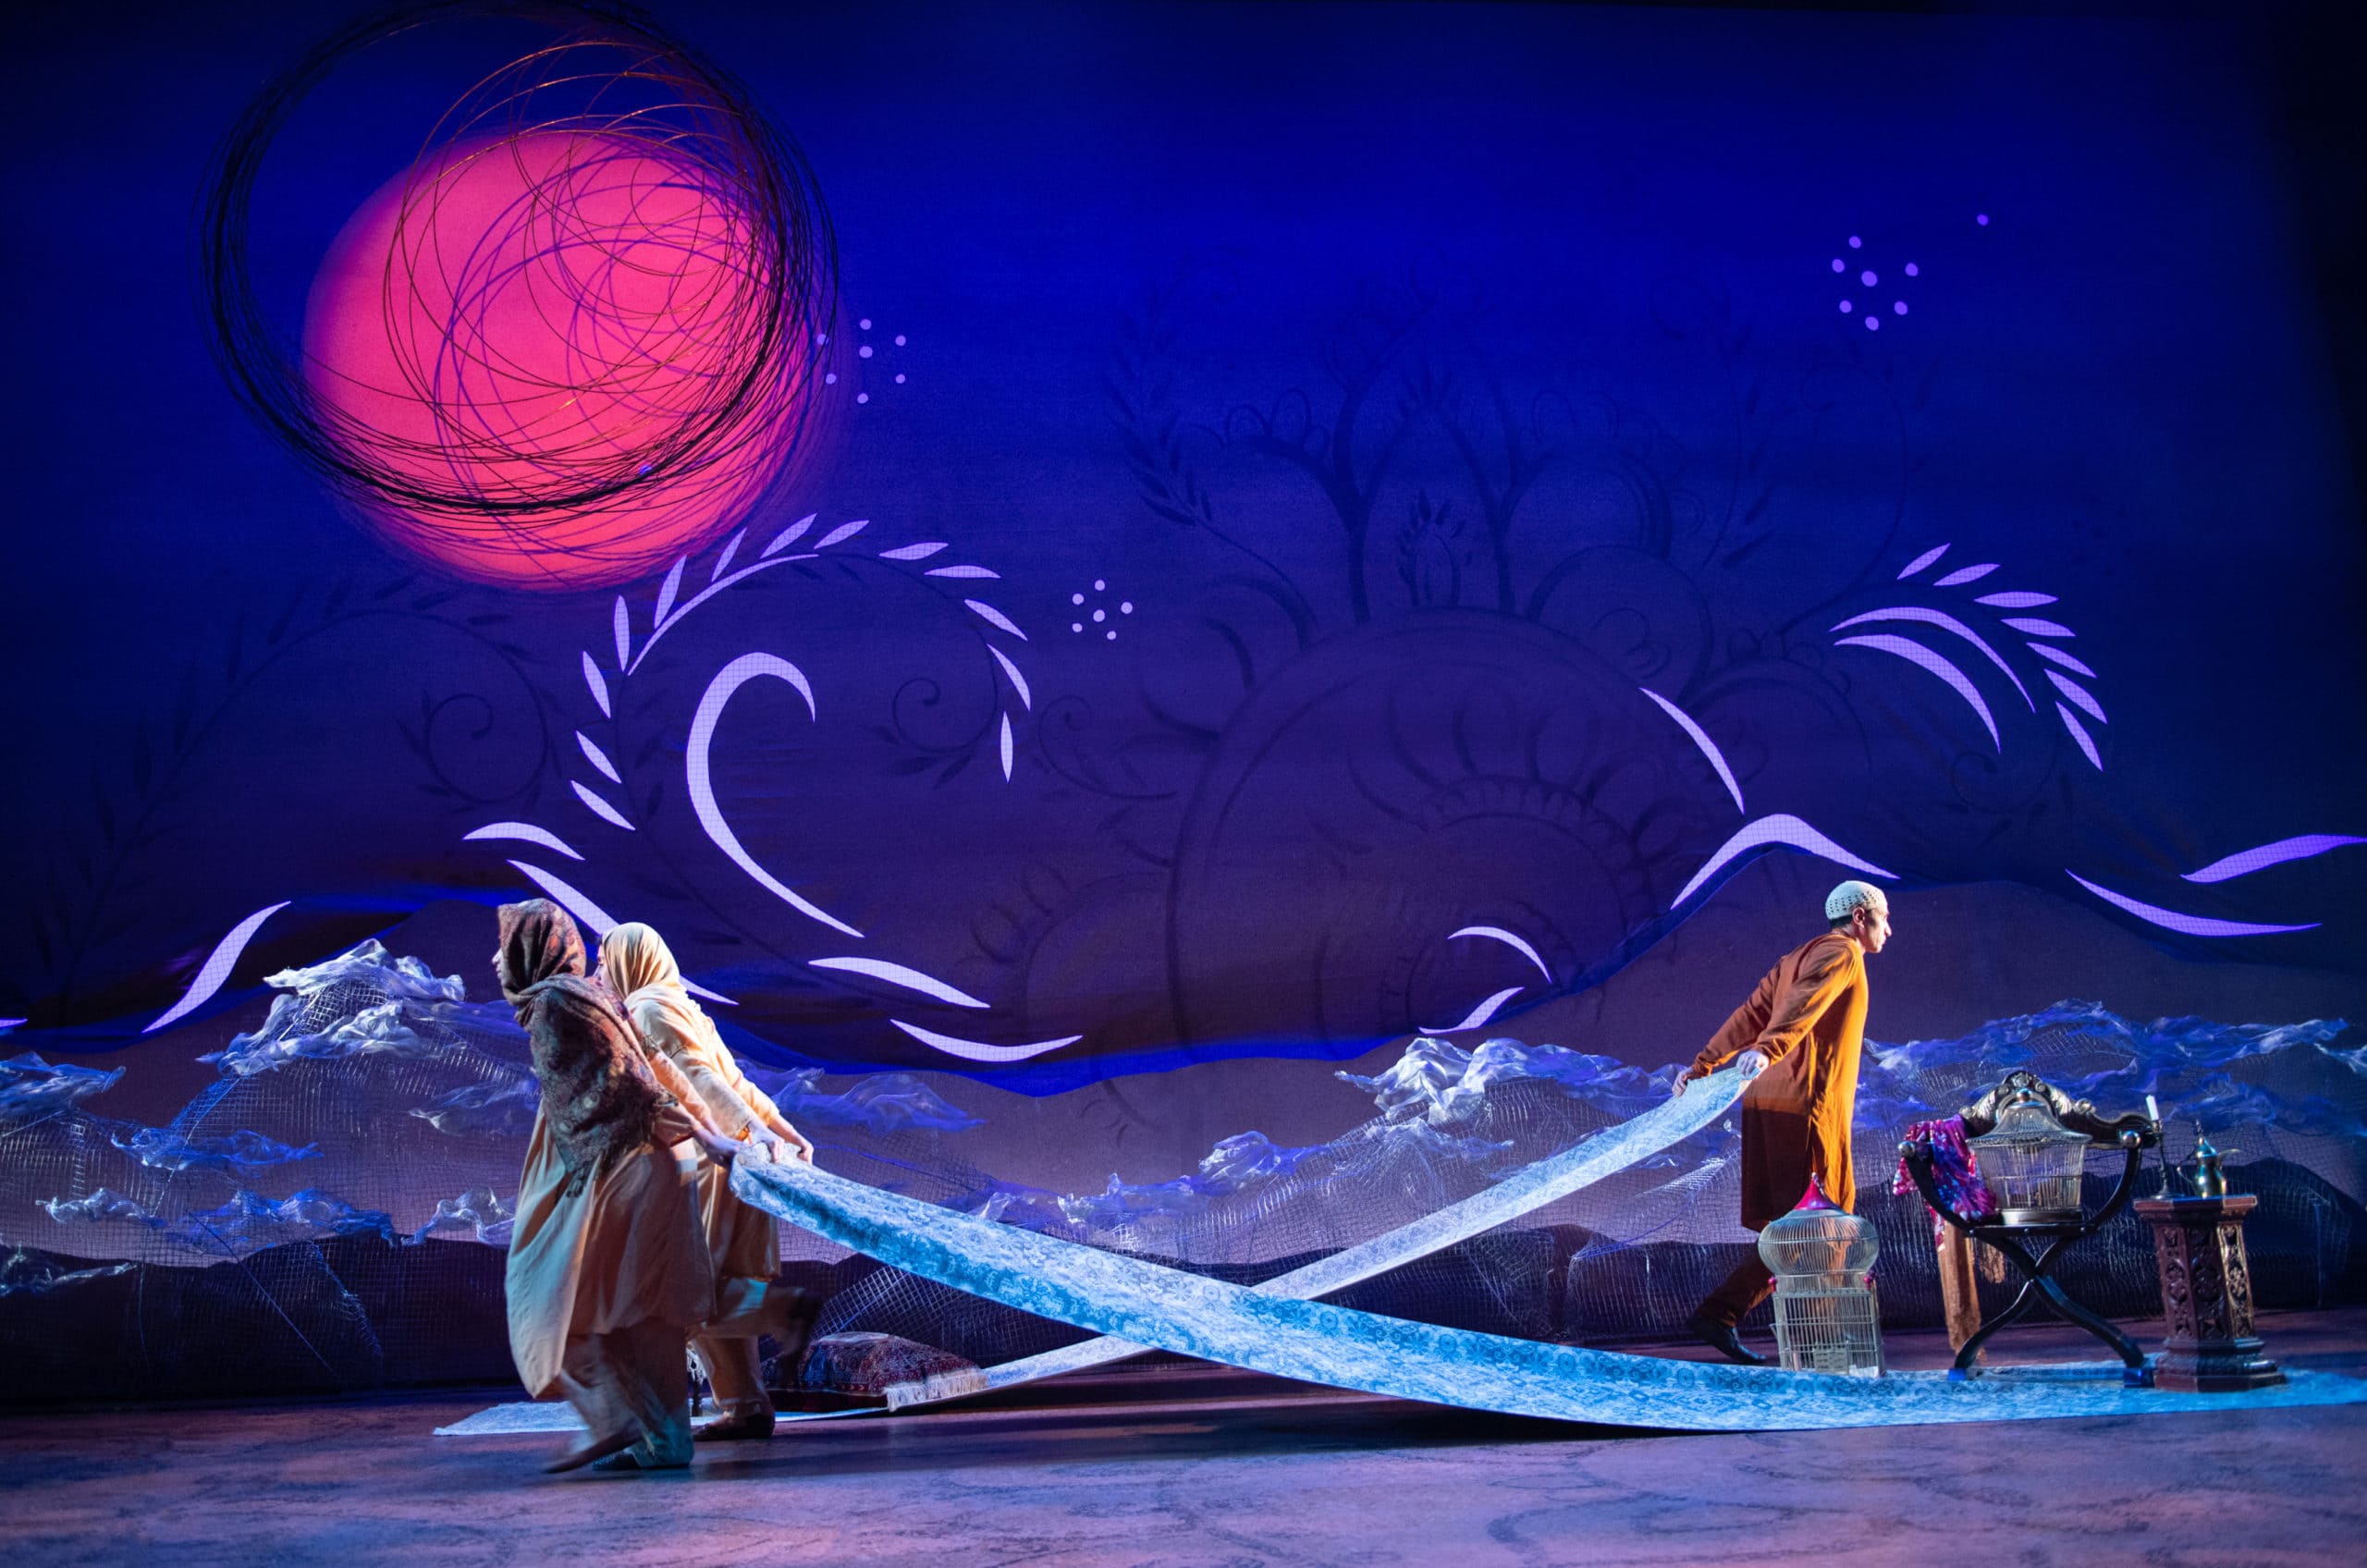 L-R: Nikita Tewani, Sarah Corey, and Antoine Yared in 'A Thousand Splendid Suns' at Arena Stage. Photo by Margot Schulman,